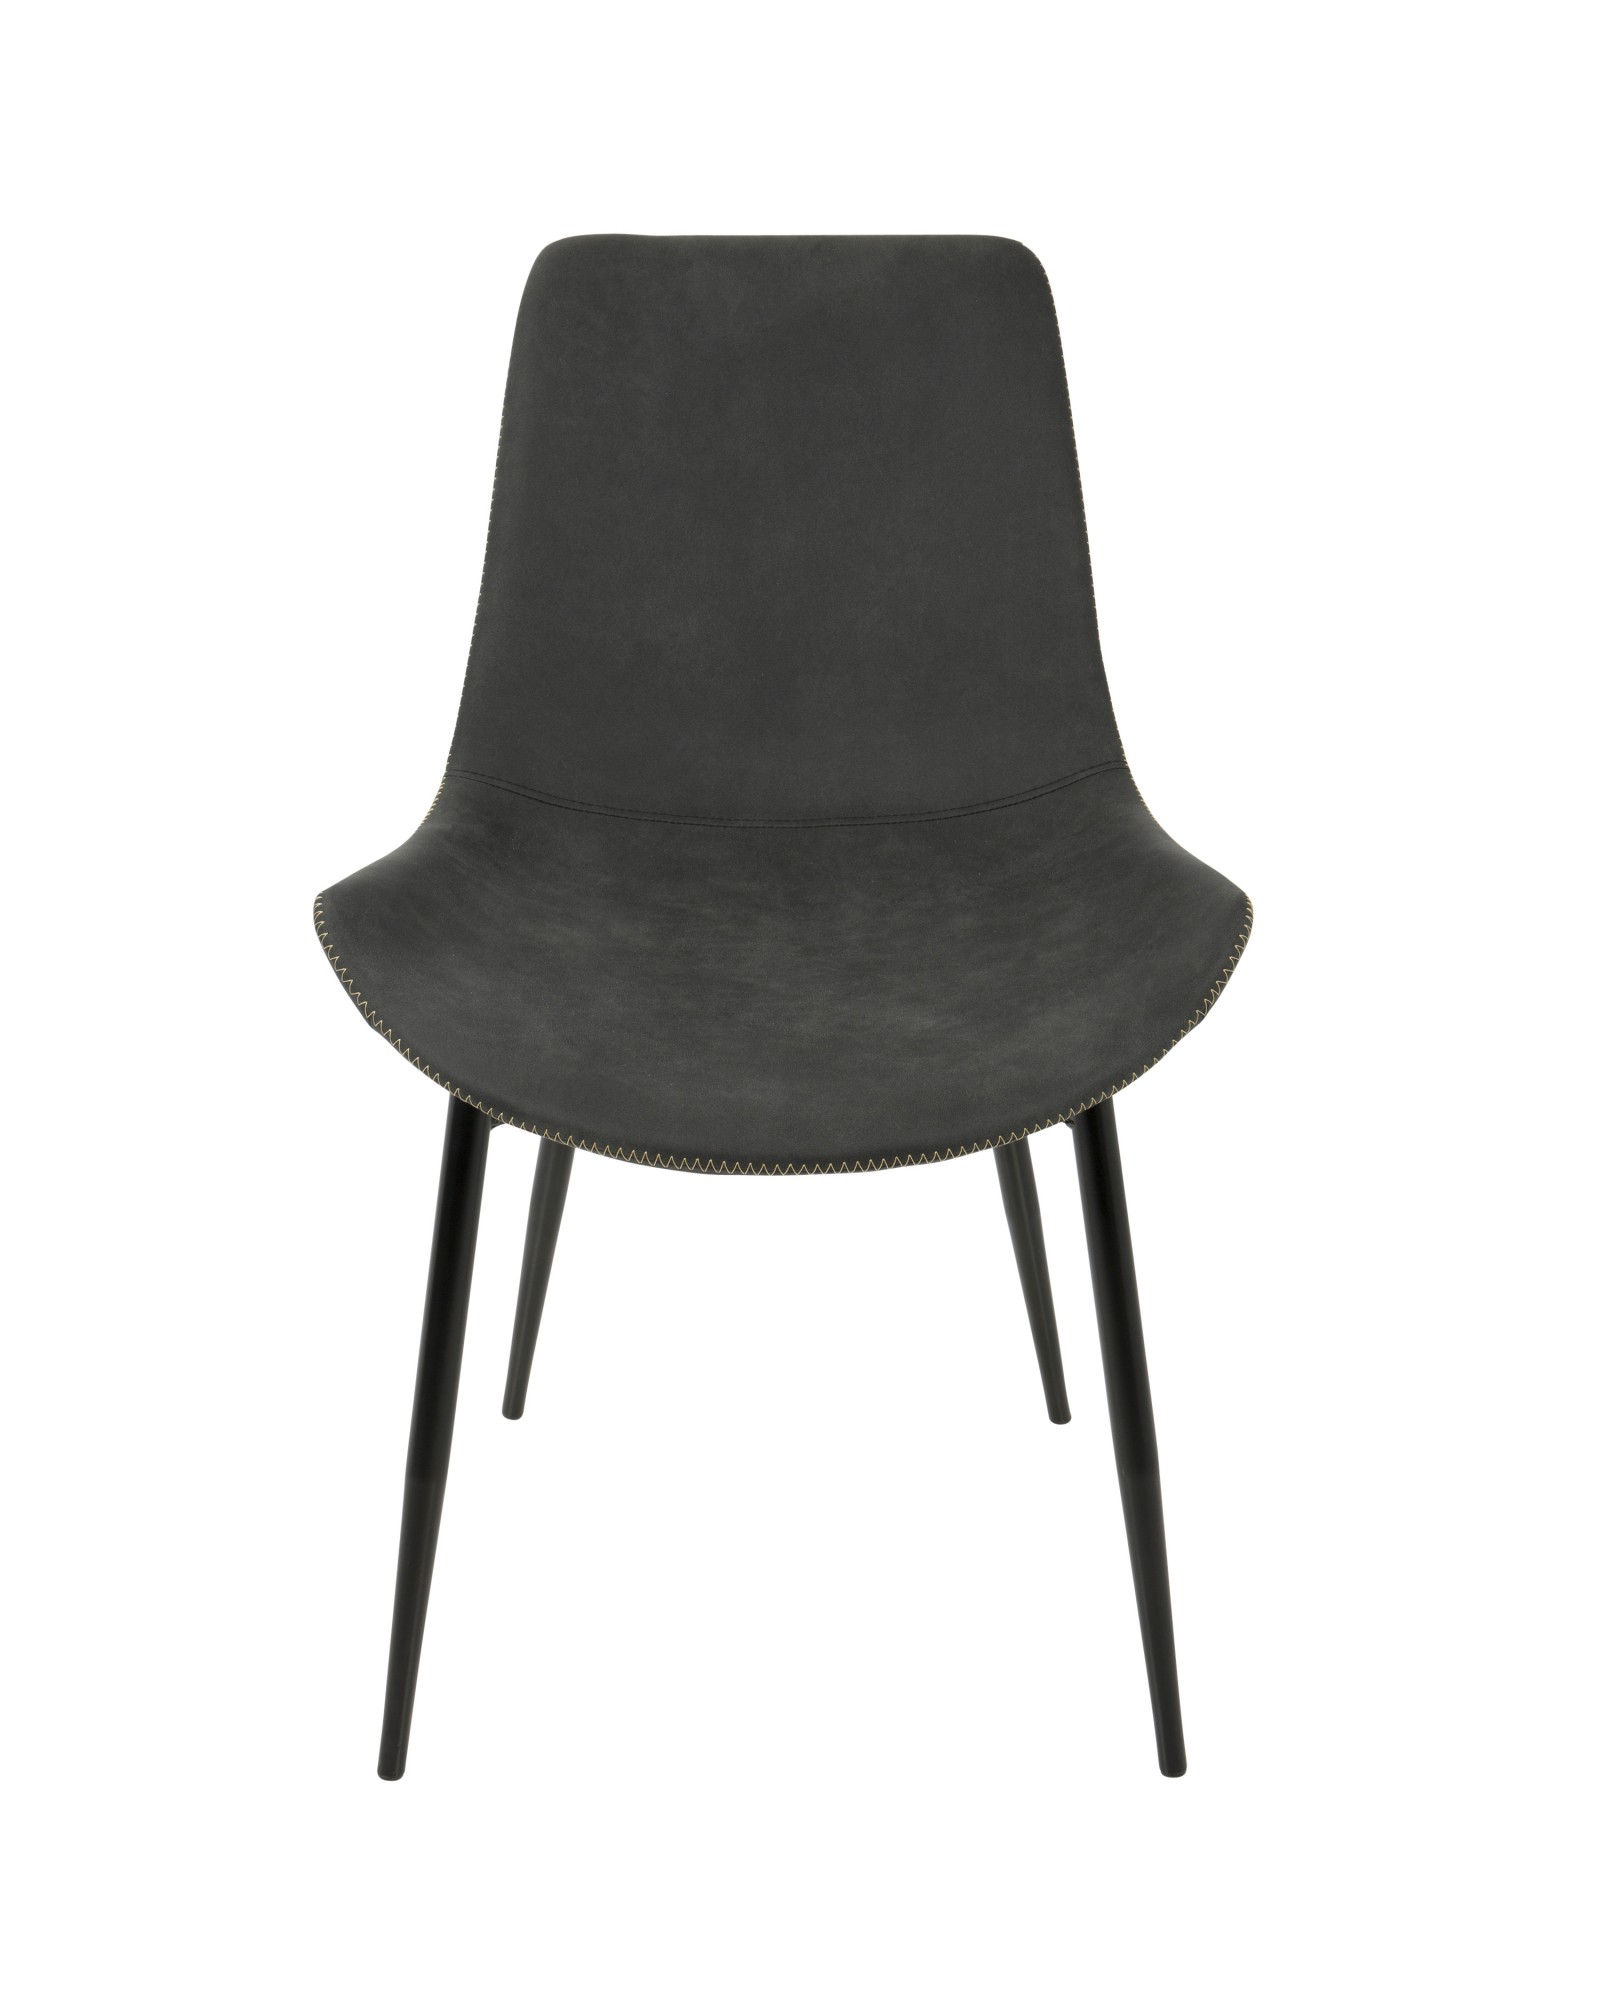 Duke Industrial Dining Chair in Black and Grey Fabric - Set of 2